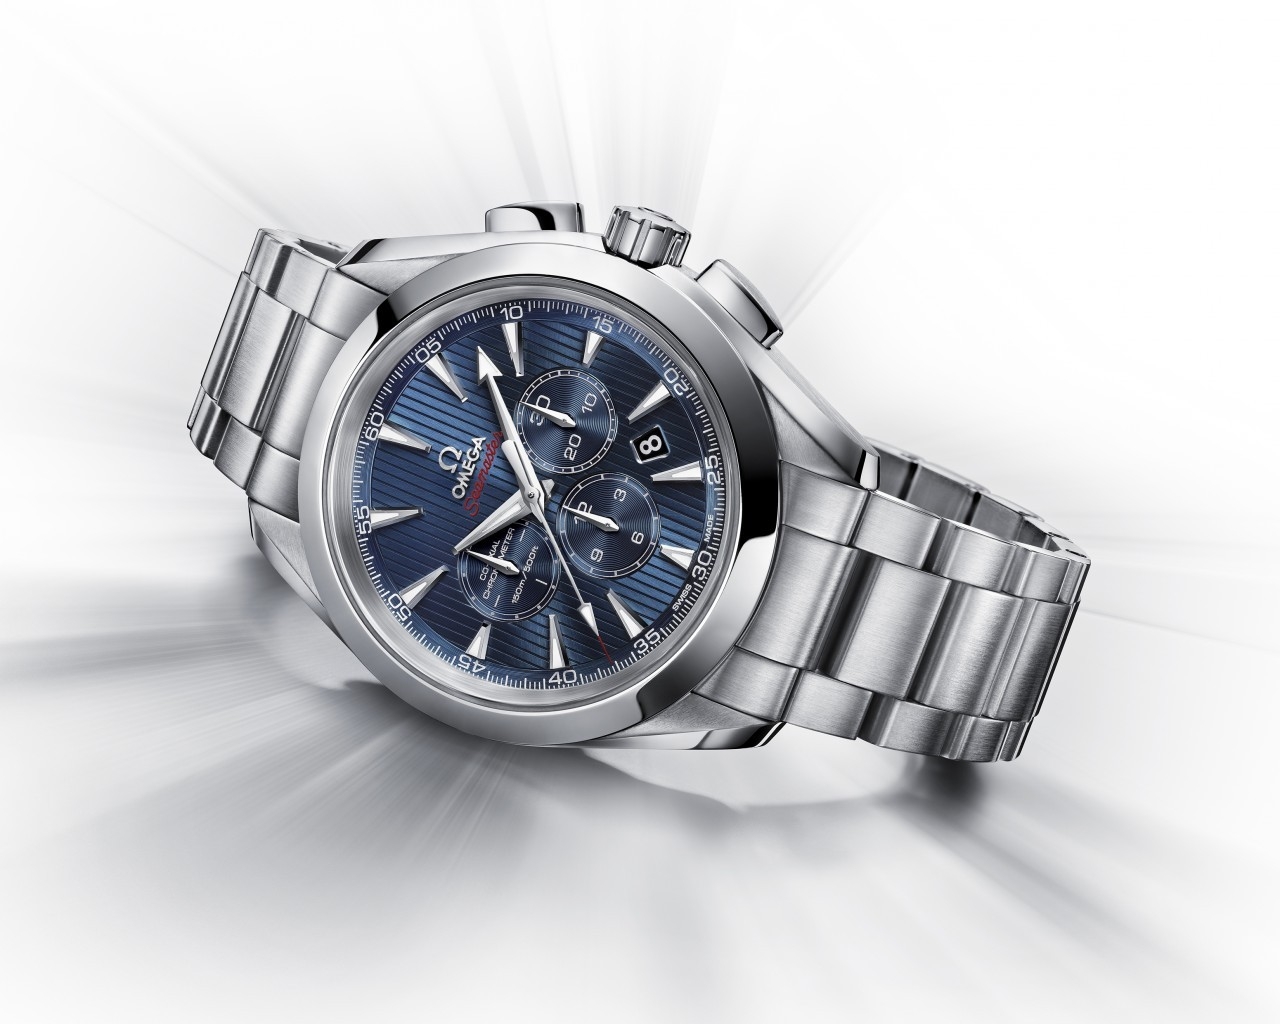 New Omega Seamaster Watch for 1280 x 1024 resolution